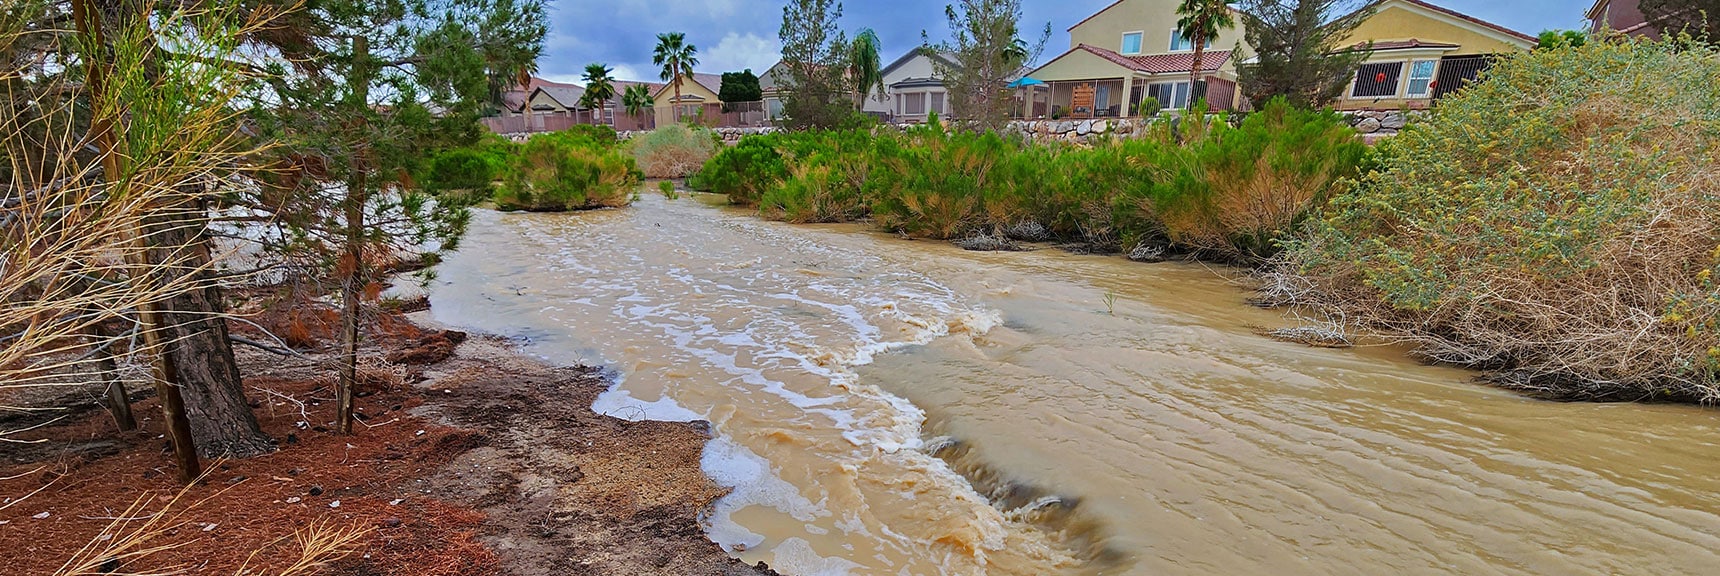 Torrent was Strong Enough to Name the Rapids! This One is "Devil's Drop". | Flash Flood in Northwest Las Vegas, Nevada